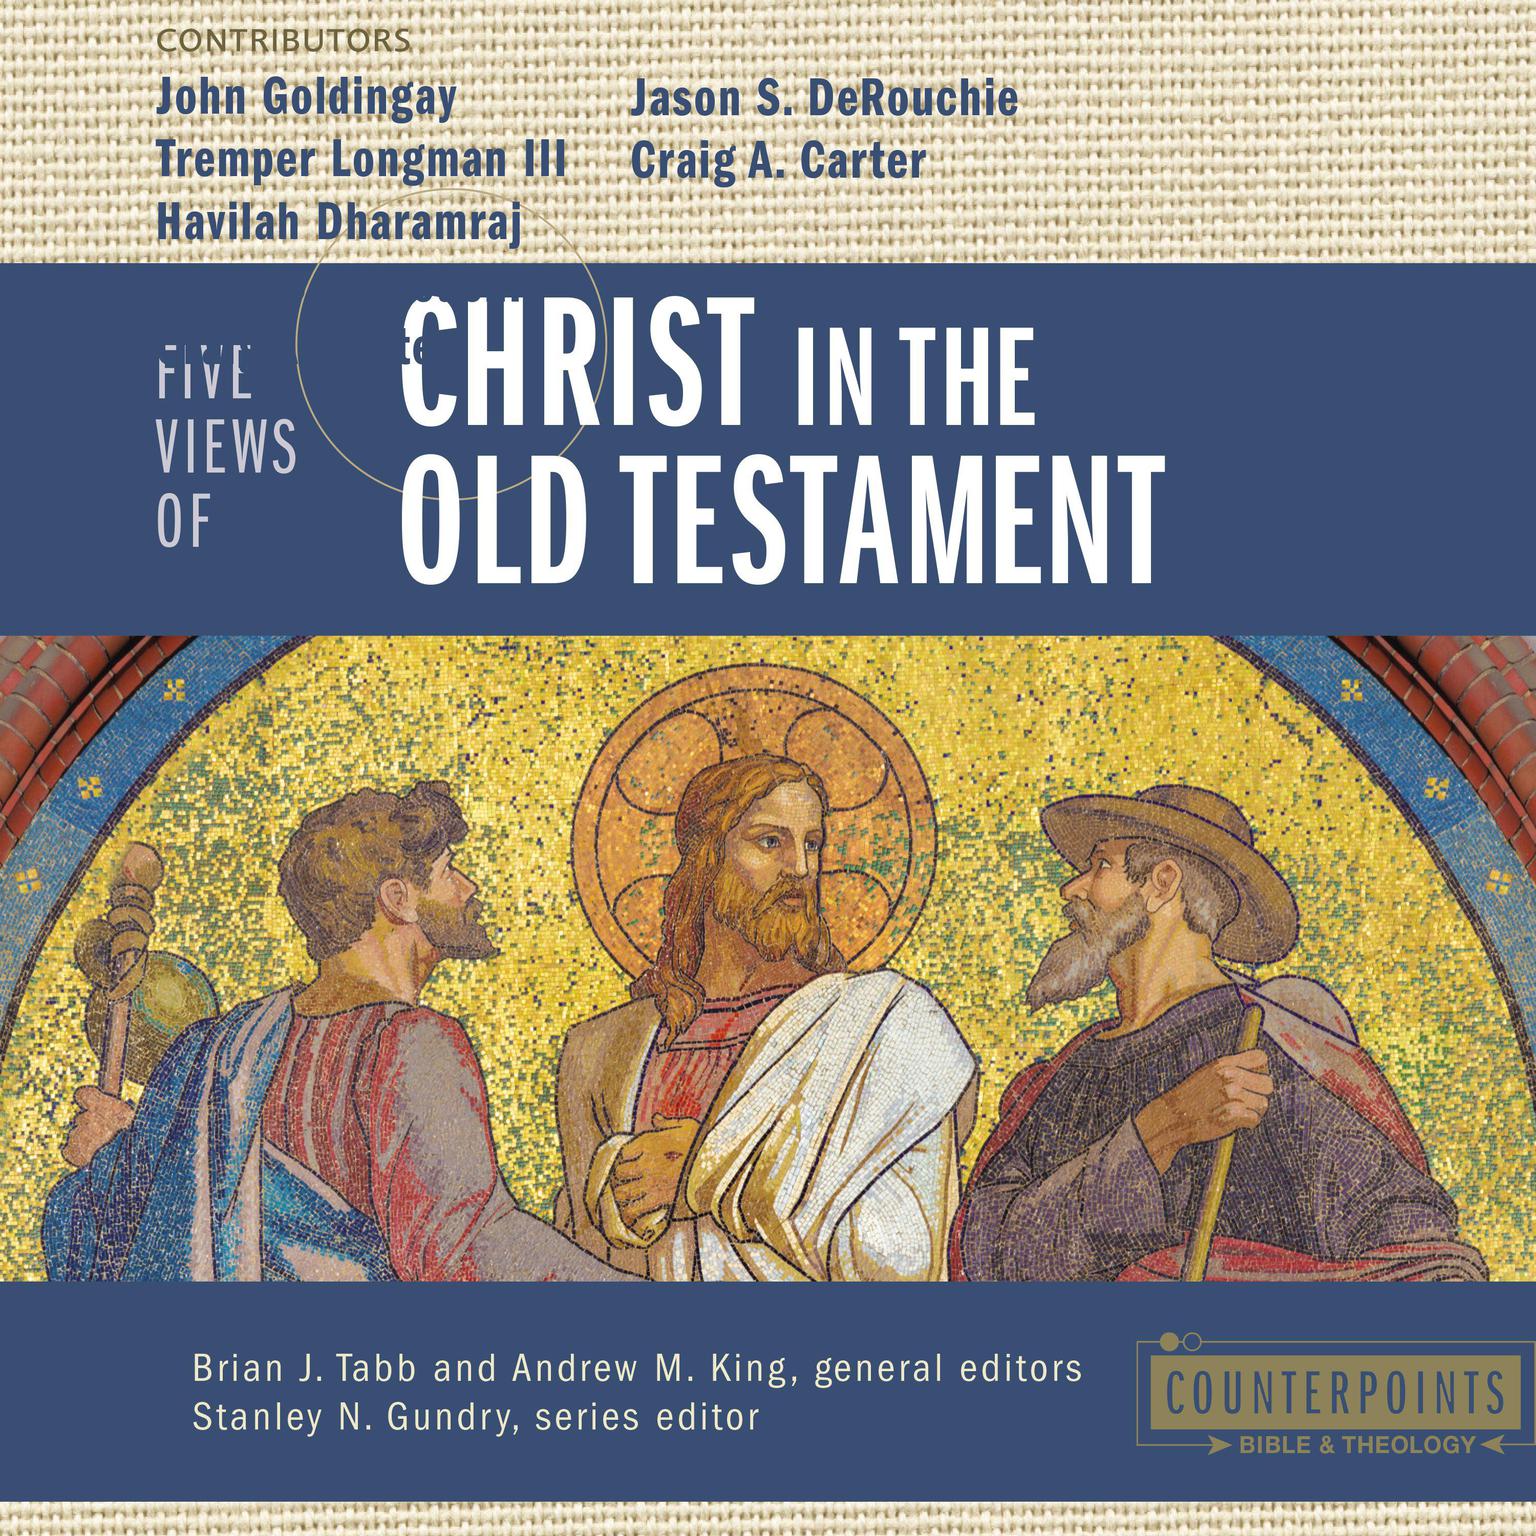 Five Views of Christ in the Old Testament: Genre, Authorial Intent, and the Nature of Scripture Audiobook, by John Goldingay